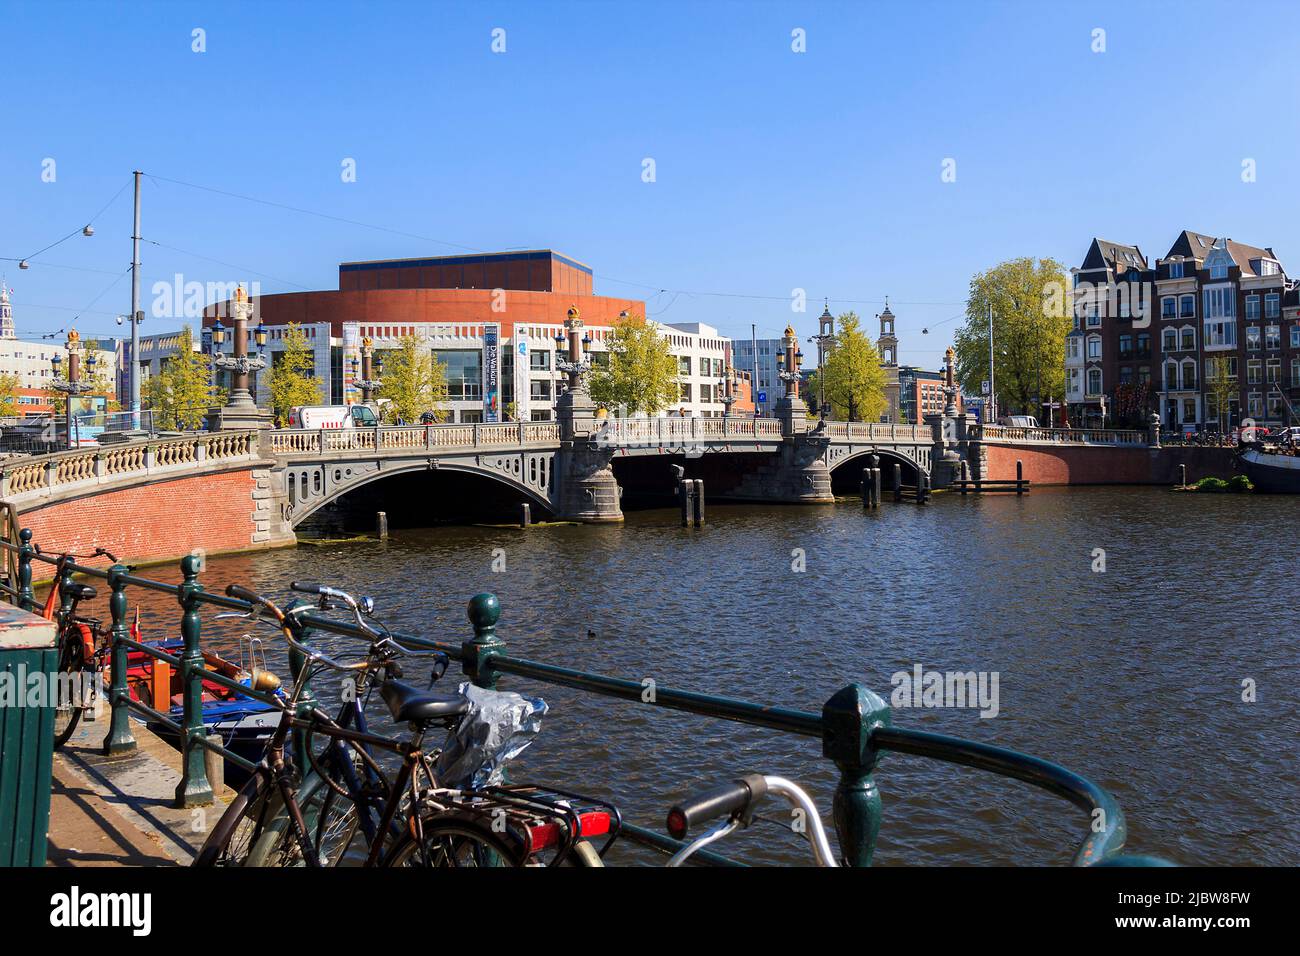 There are The Opera House and the Blue Bridge through river Amstel May 5, 2013 in Amsterdam, Netherlands. Stock Photo